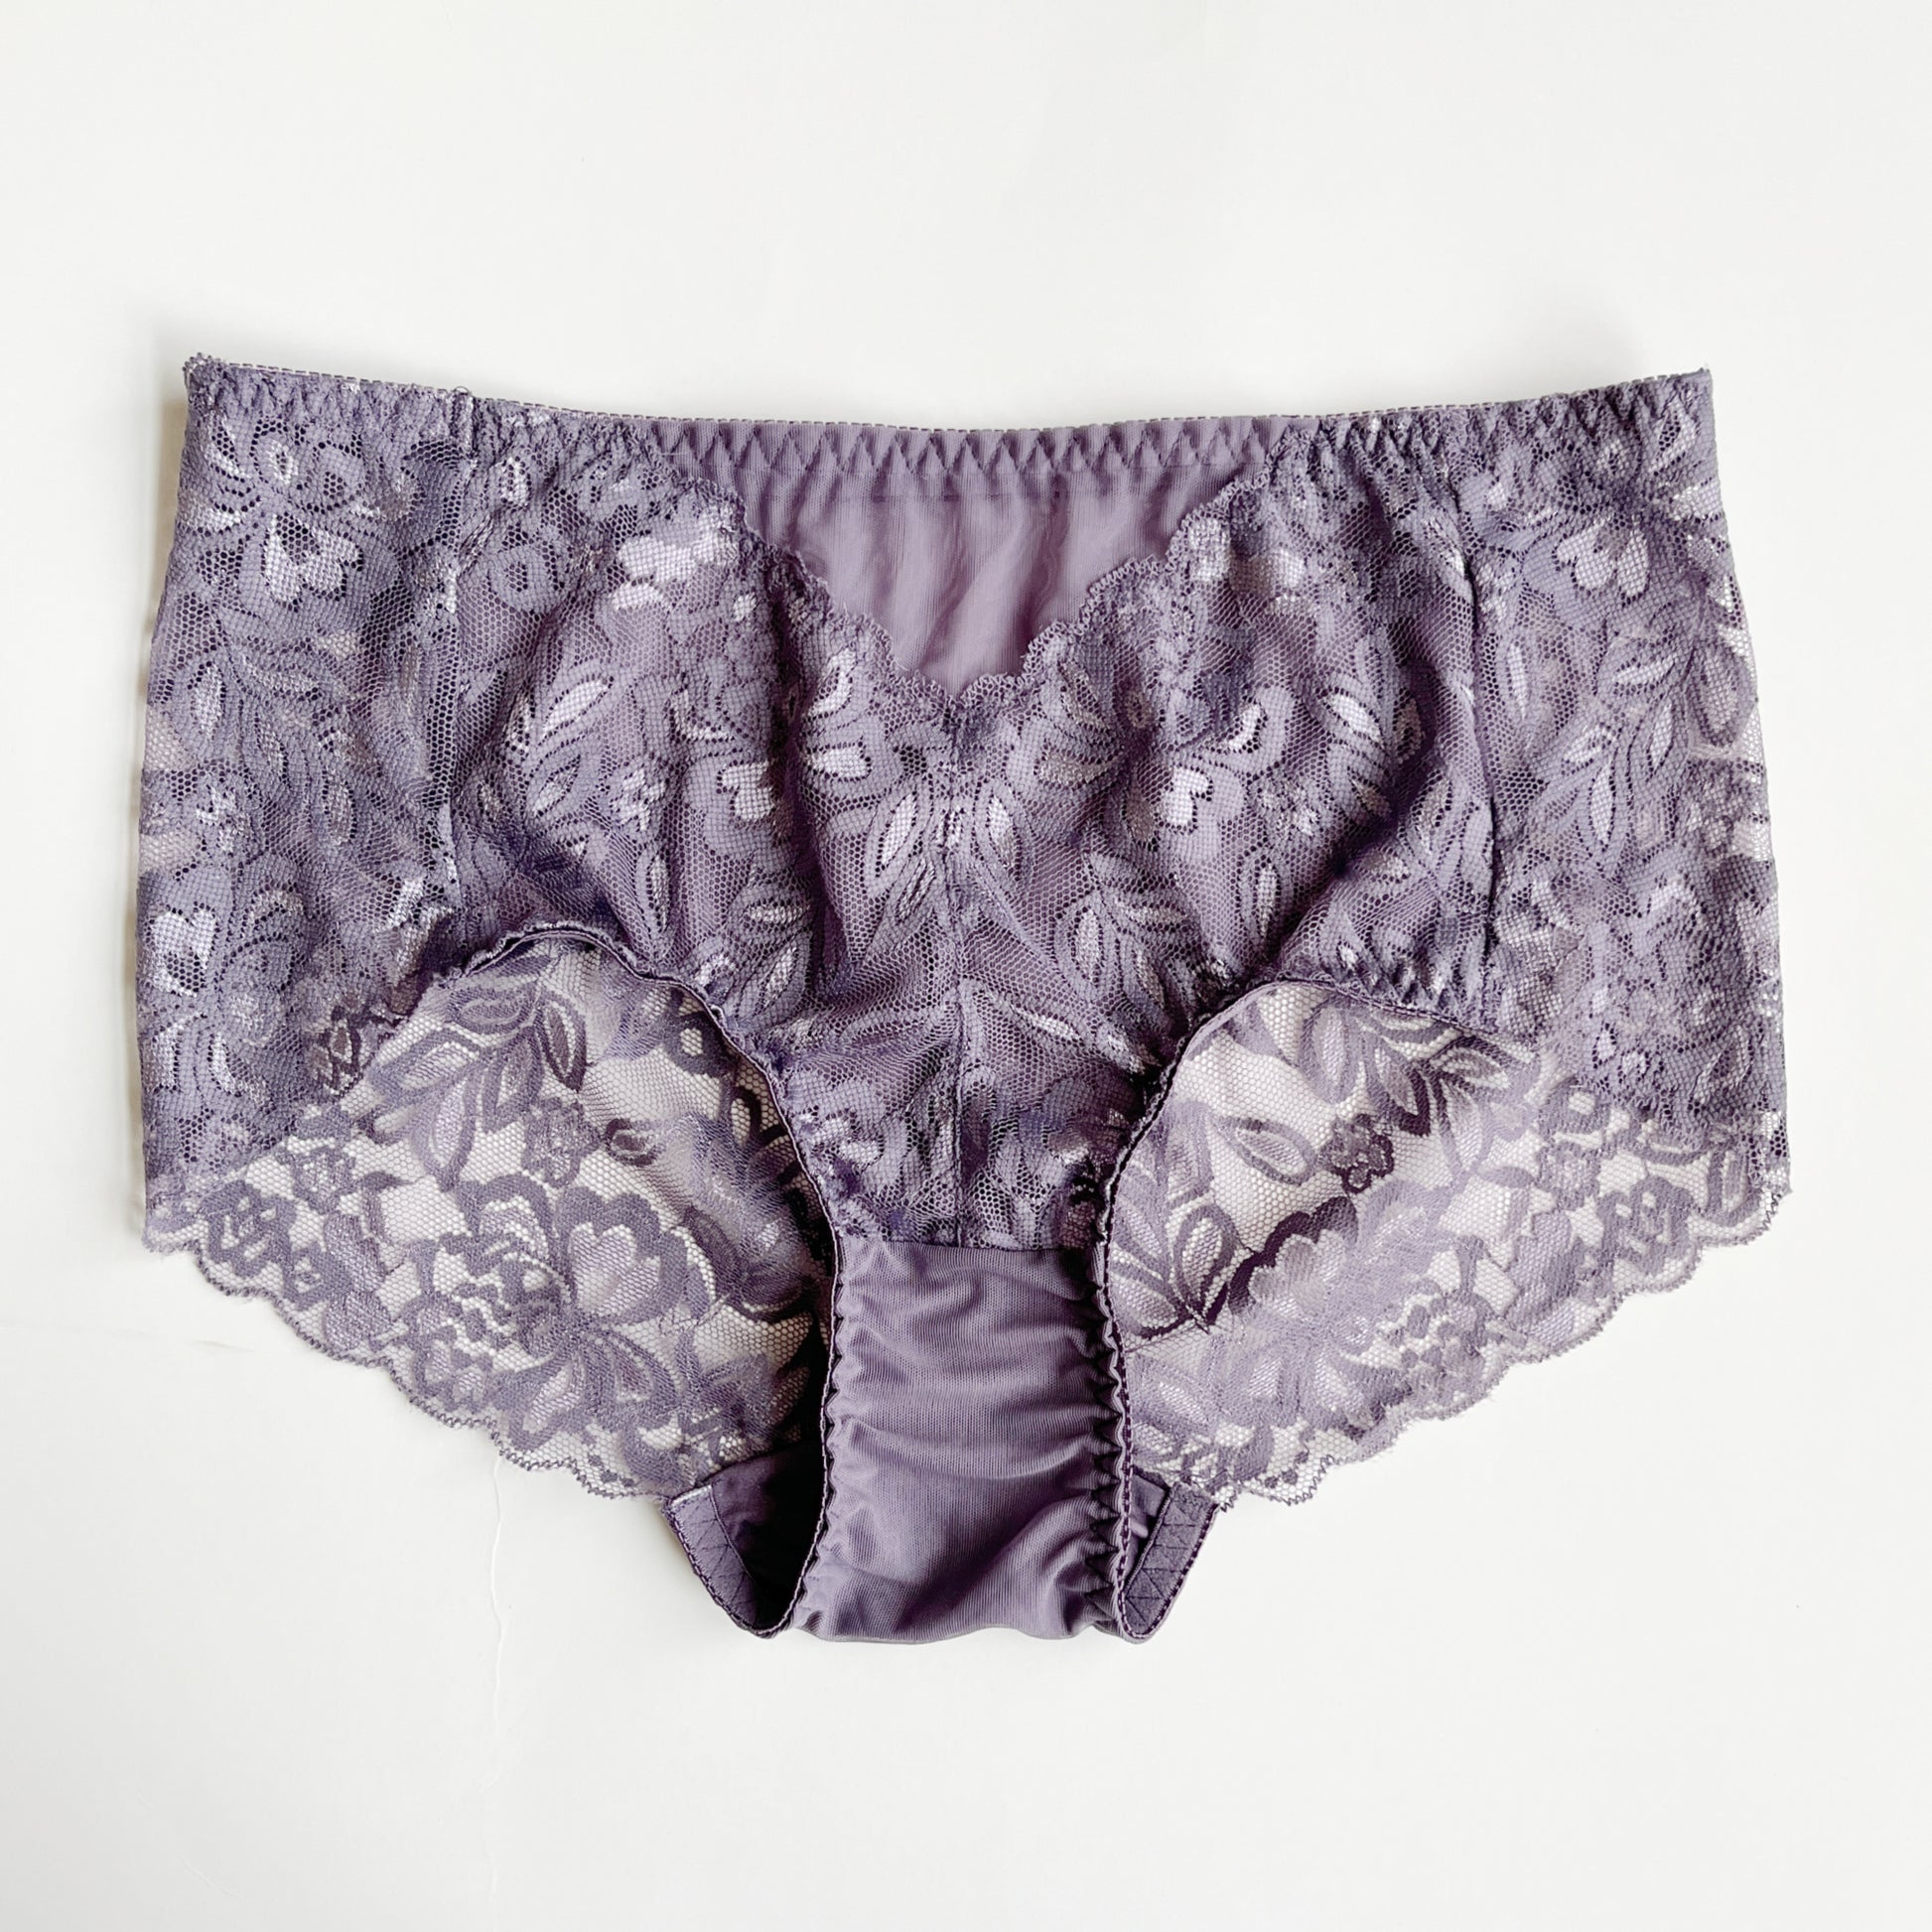 mauve silk panties high waist | Made in Canada scalloped lace underwear 